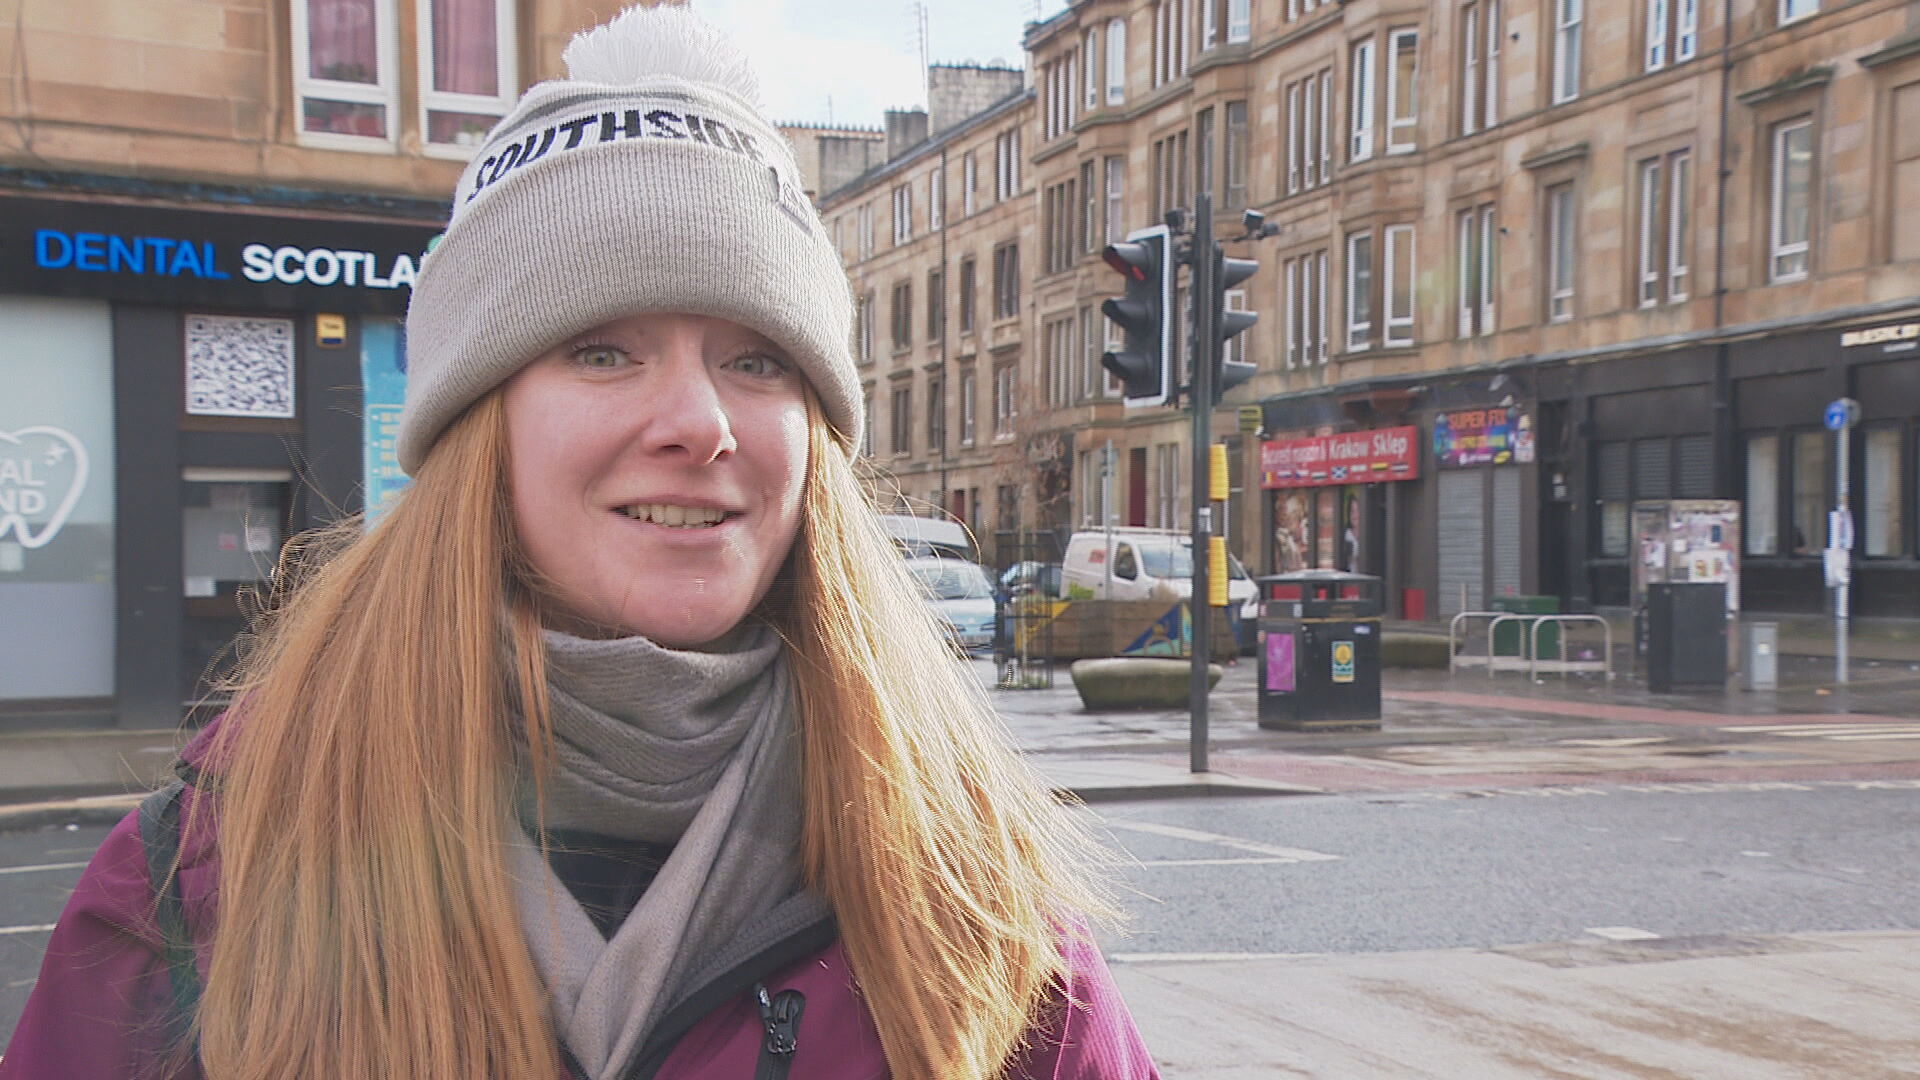 One Govanhill resident said she was happy to see her 'putting her mental health first'. 